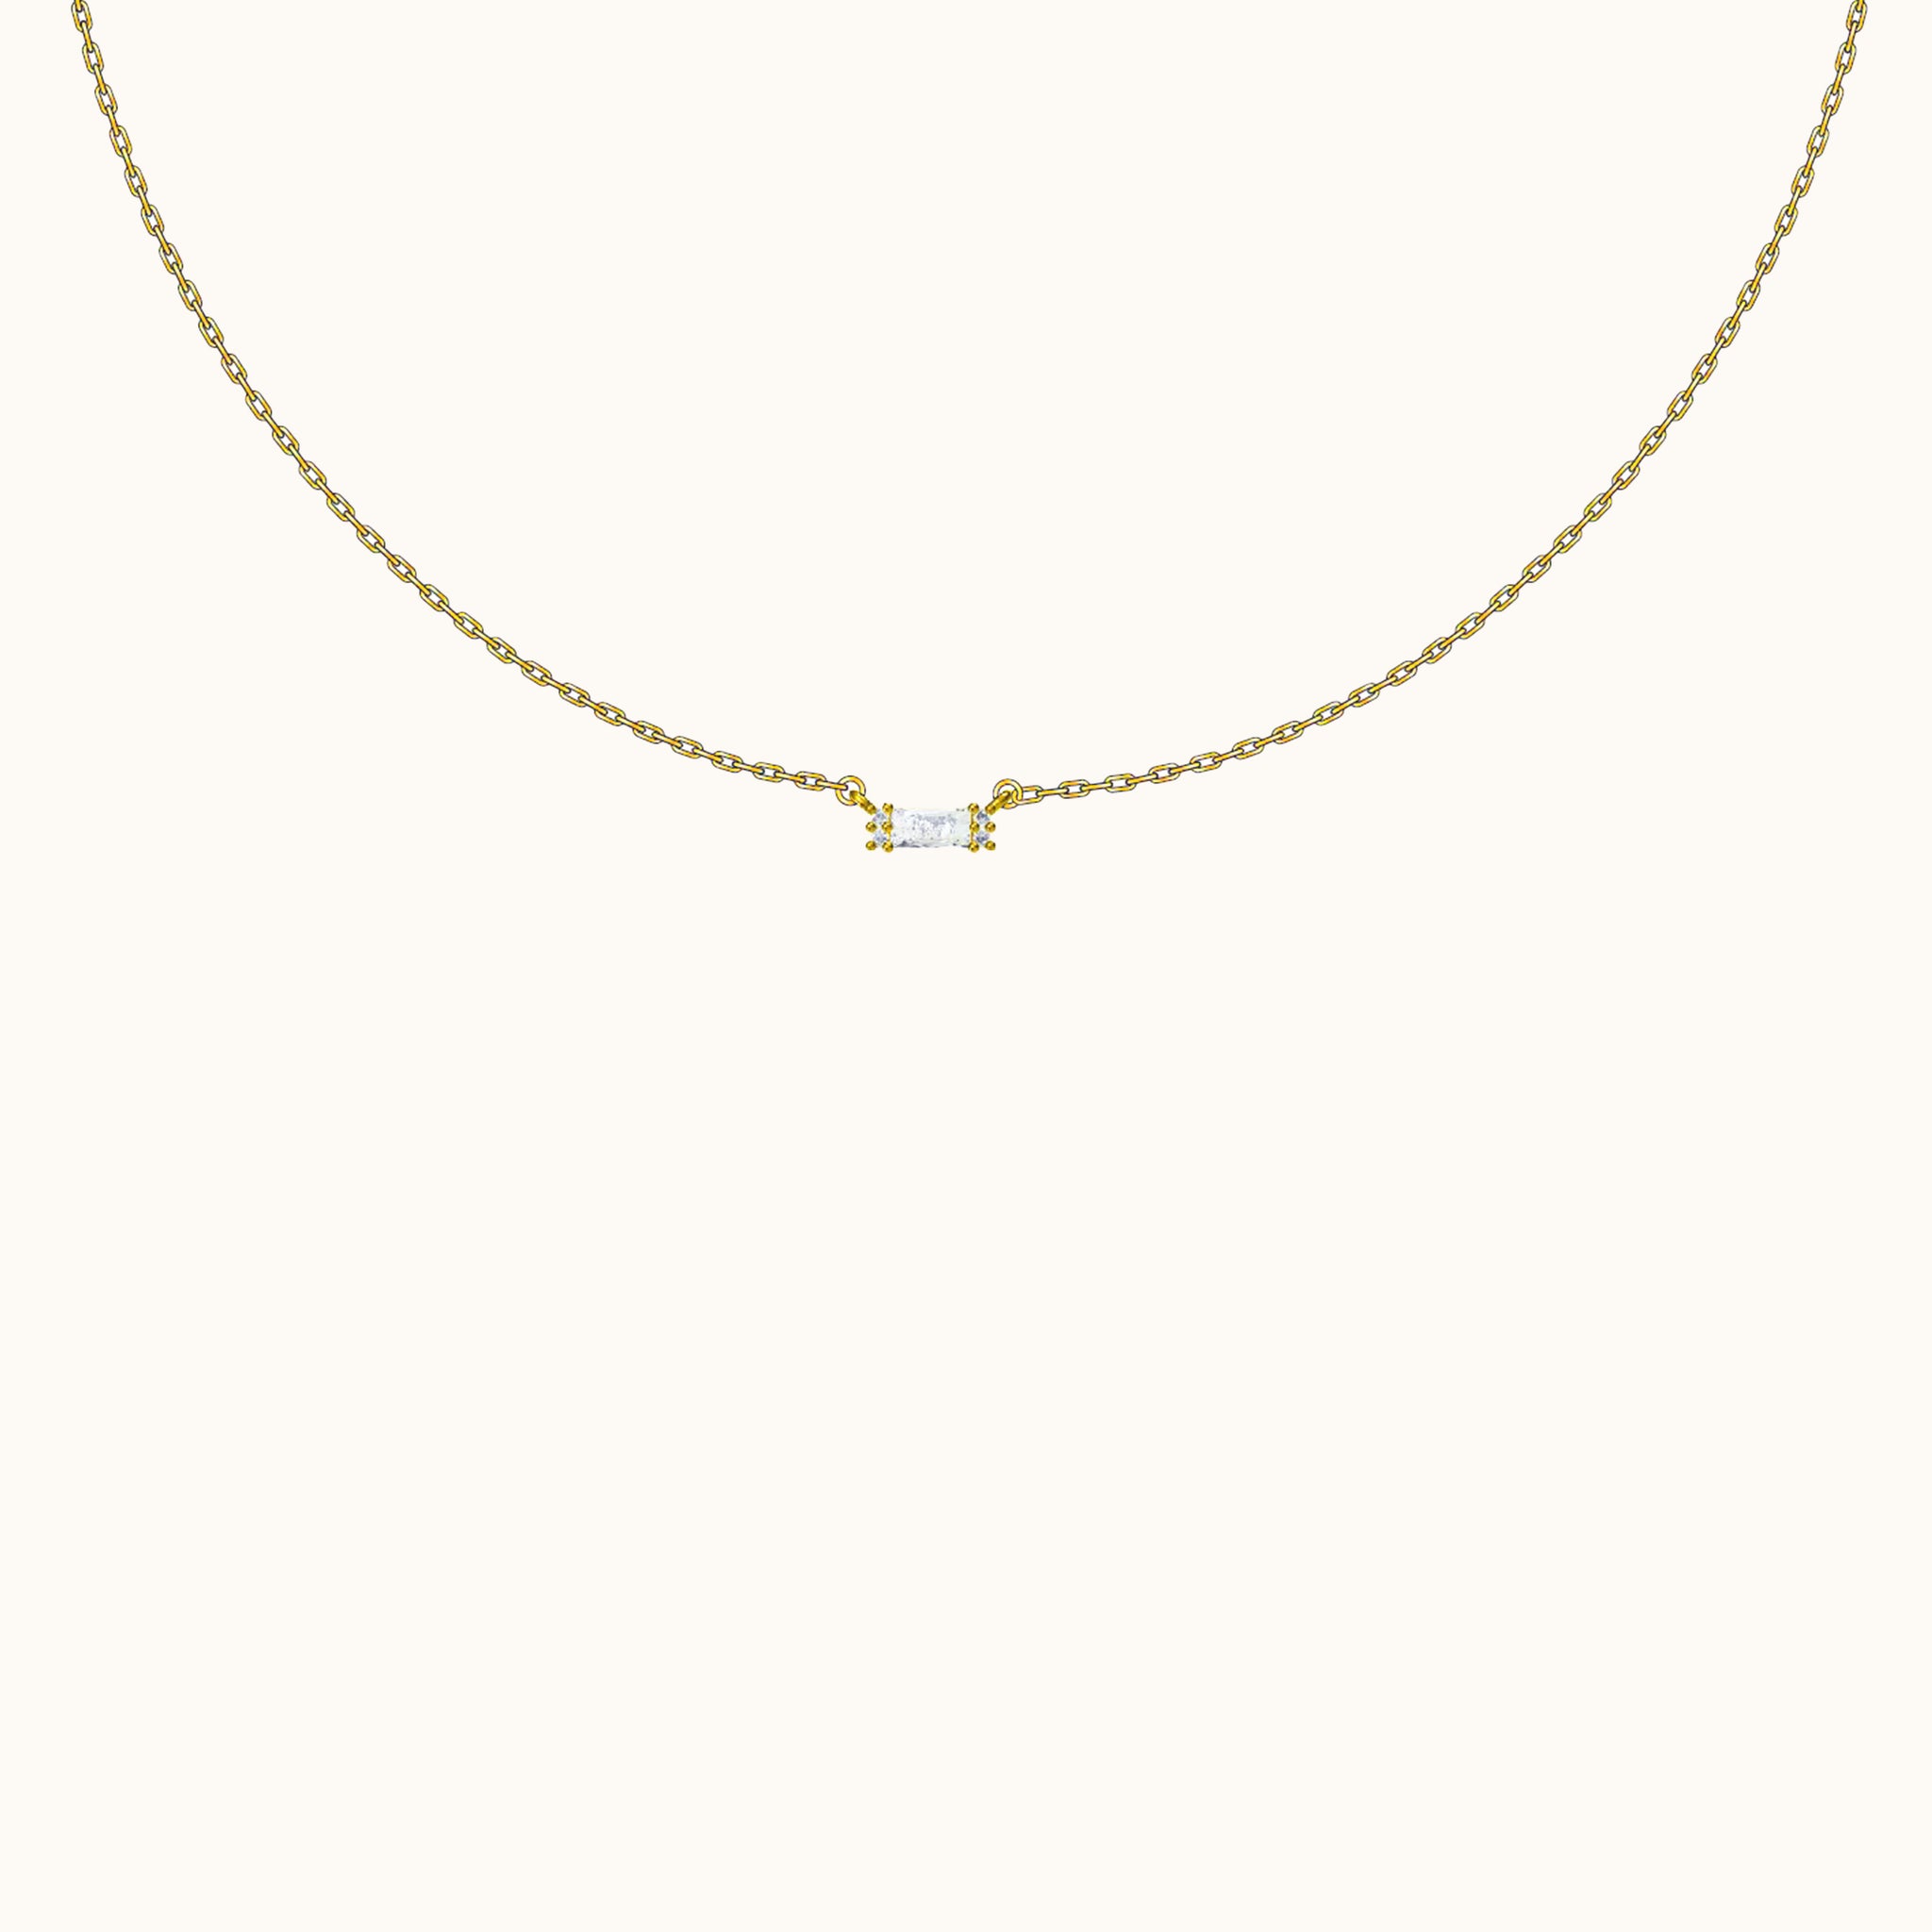 Gold Stacking CZ Pave Layered Bar Square Necklace with White Gem by Doviana